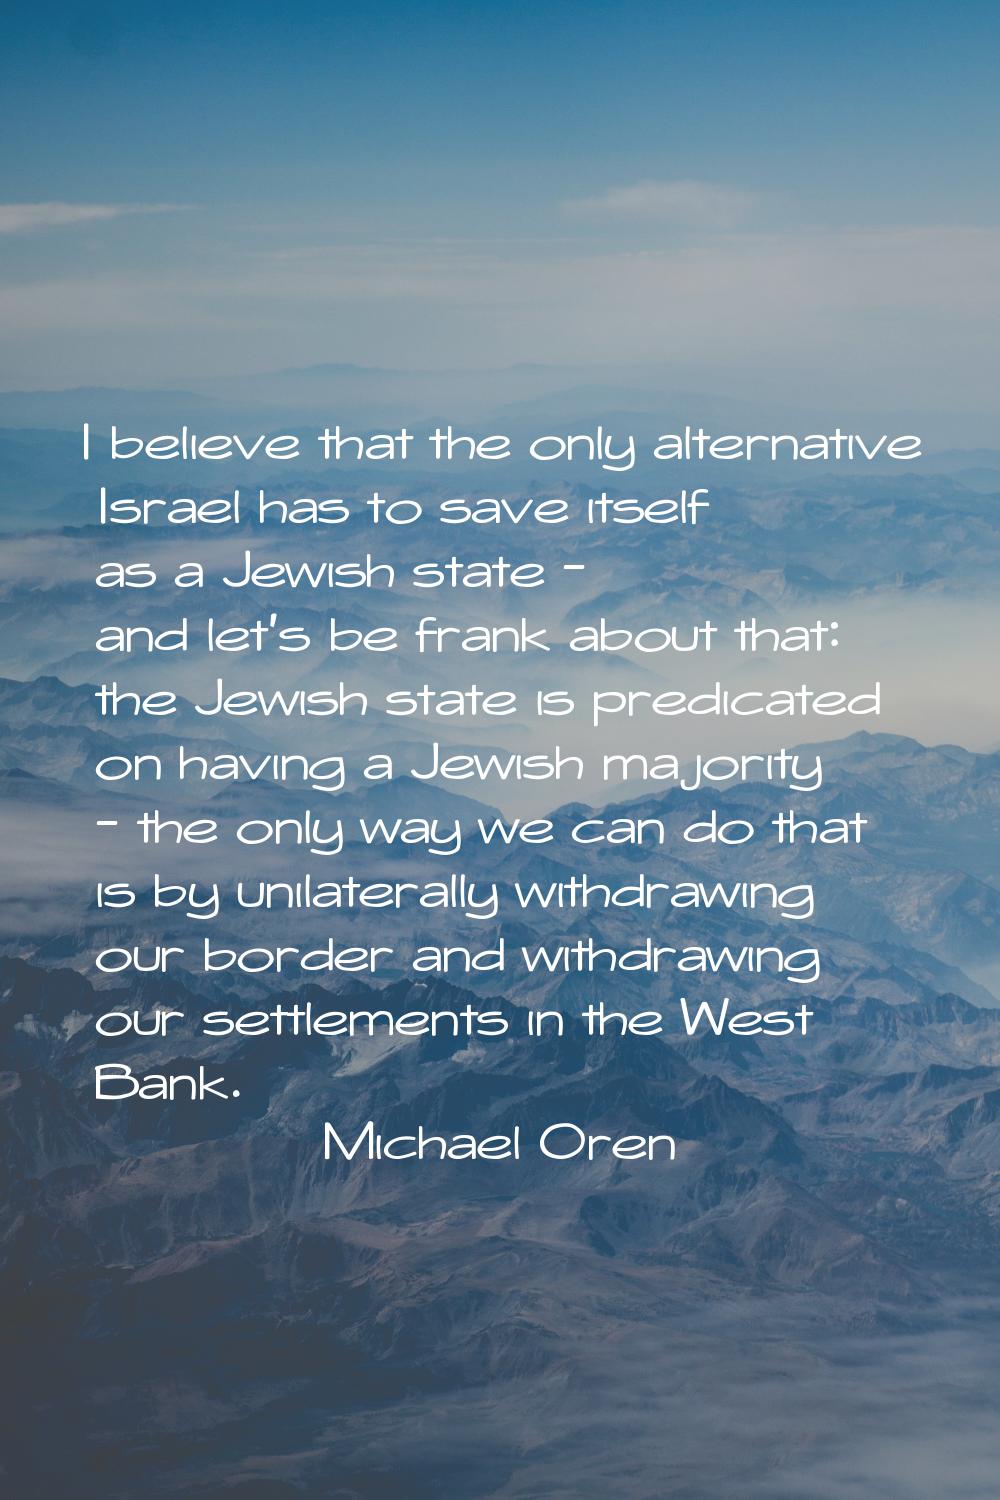 I believe that the only alternative Israel has to save itself as a Jewish state - and let's be fran